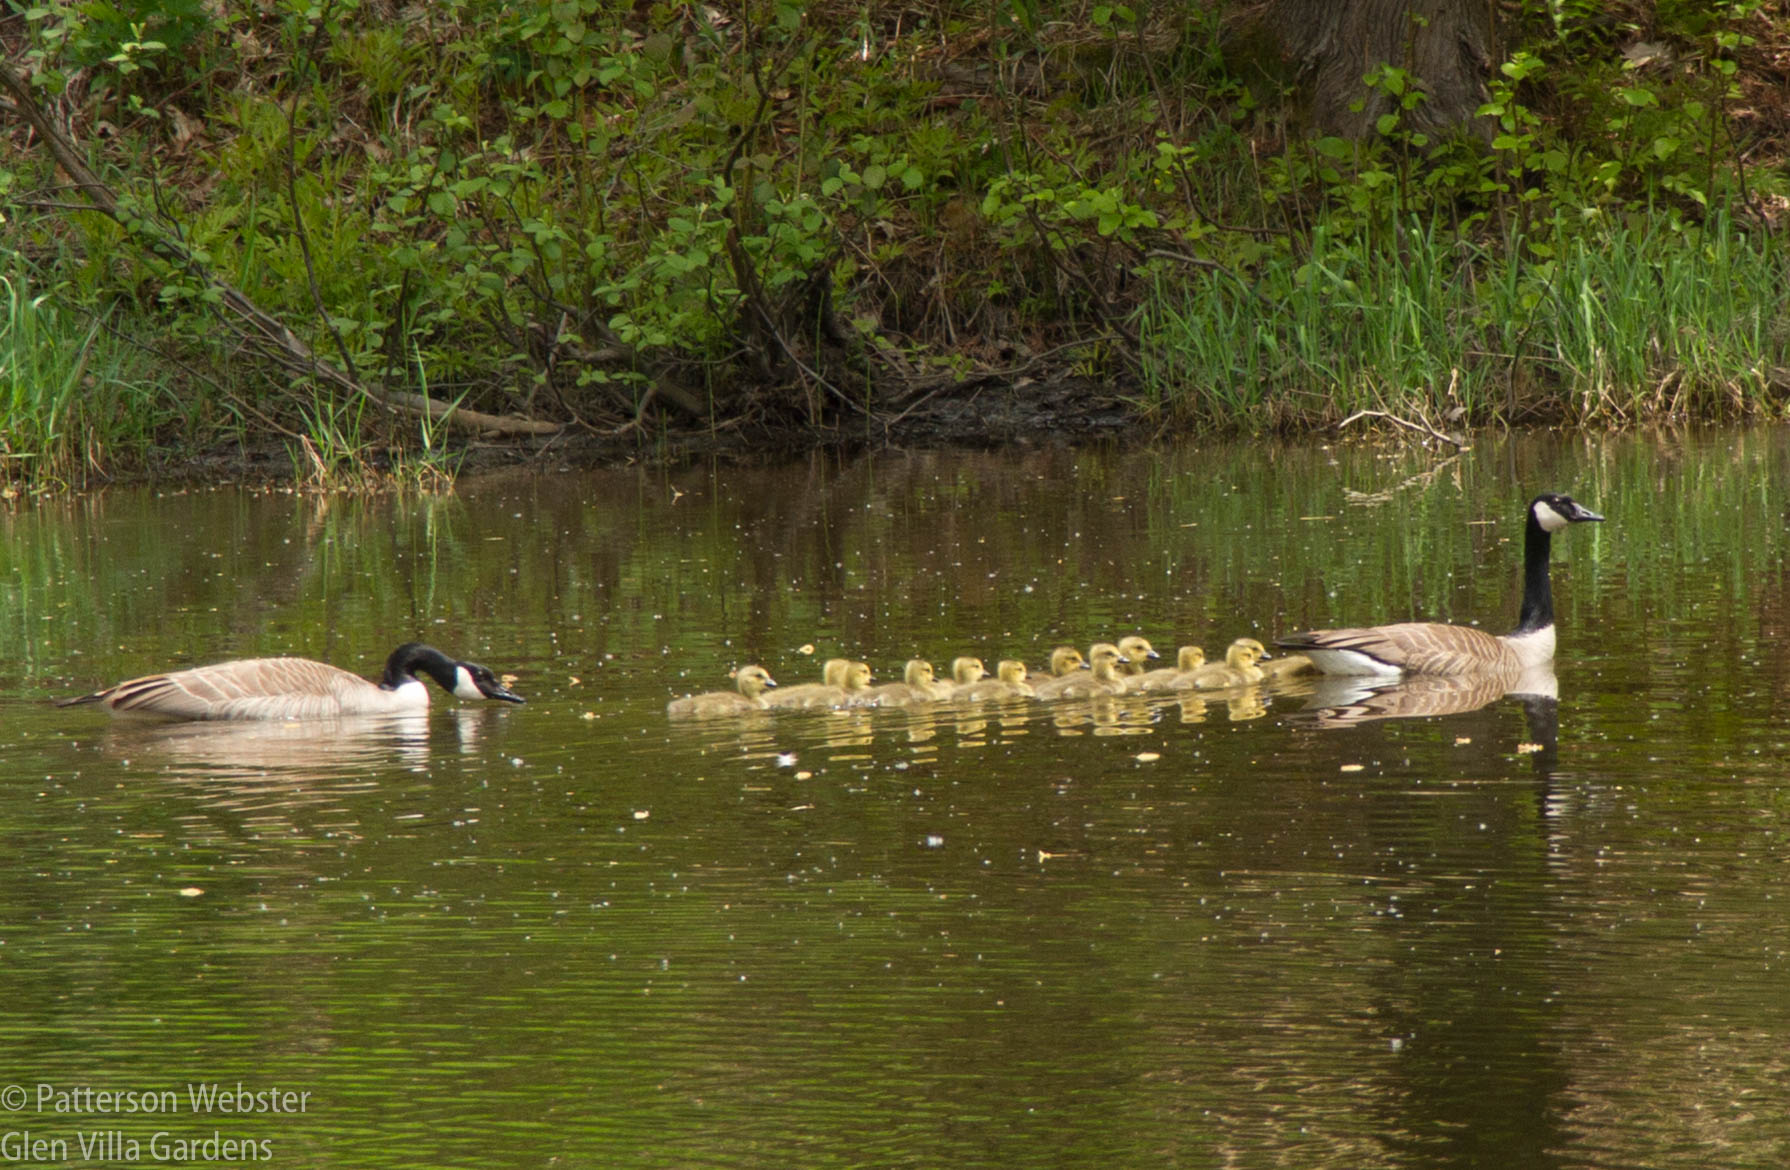 Talk about getting all your ducks in a row....